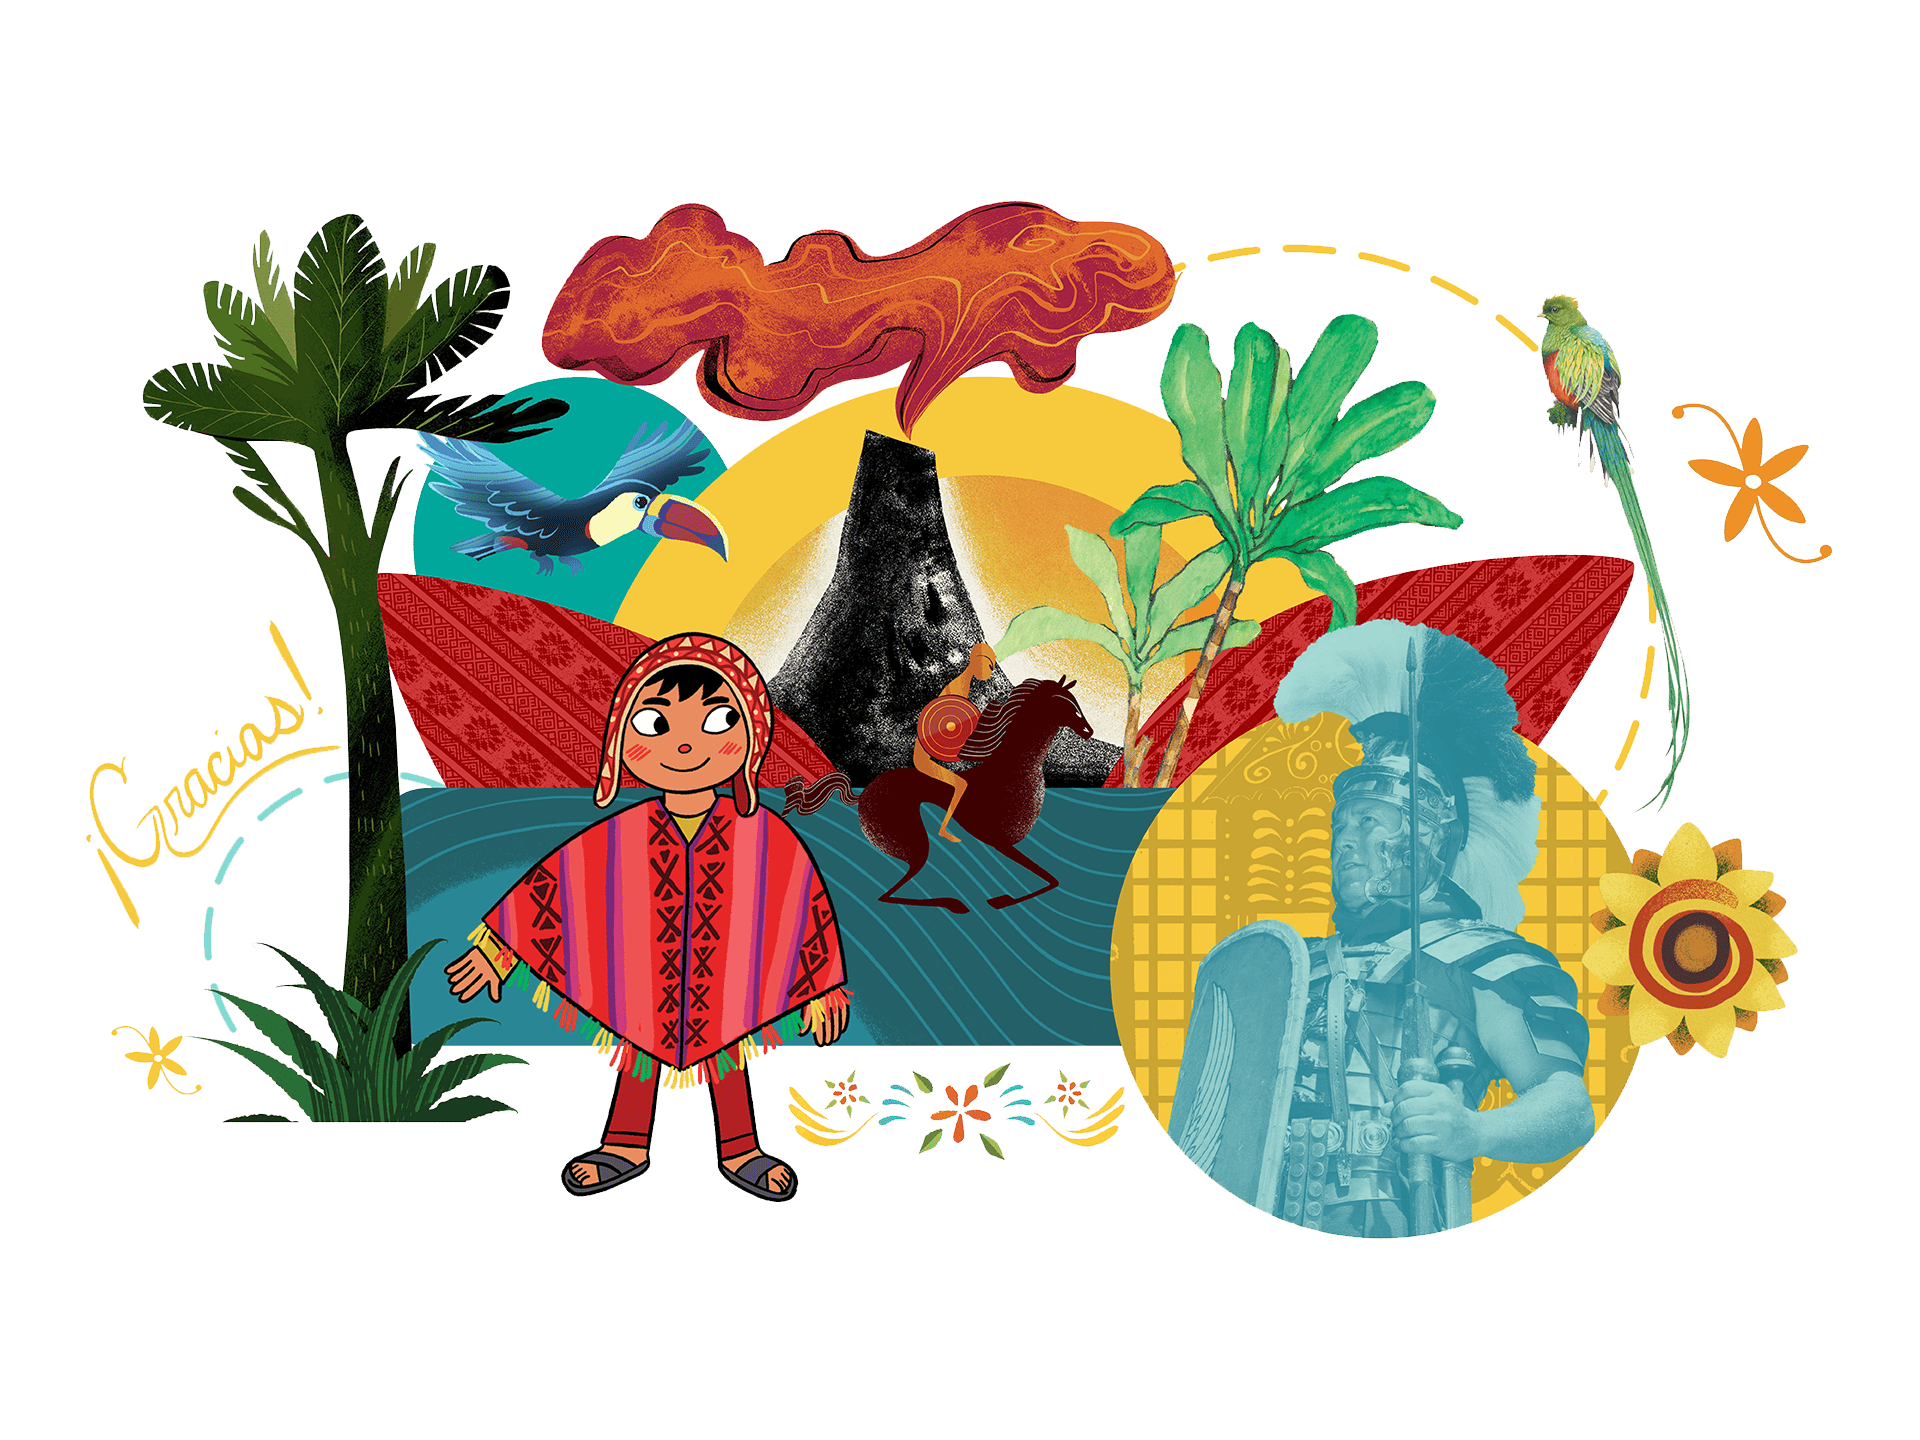 Illustration of a girl in traditional dress with a volcano, tropical plants, a macaw, and indigenous sculptures in a colorful, circular design for Core Knowledge Language Arts.